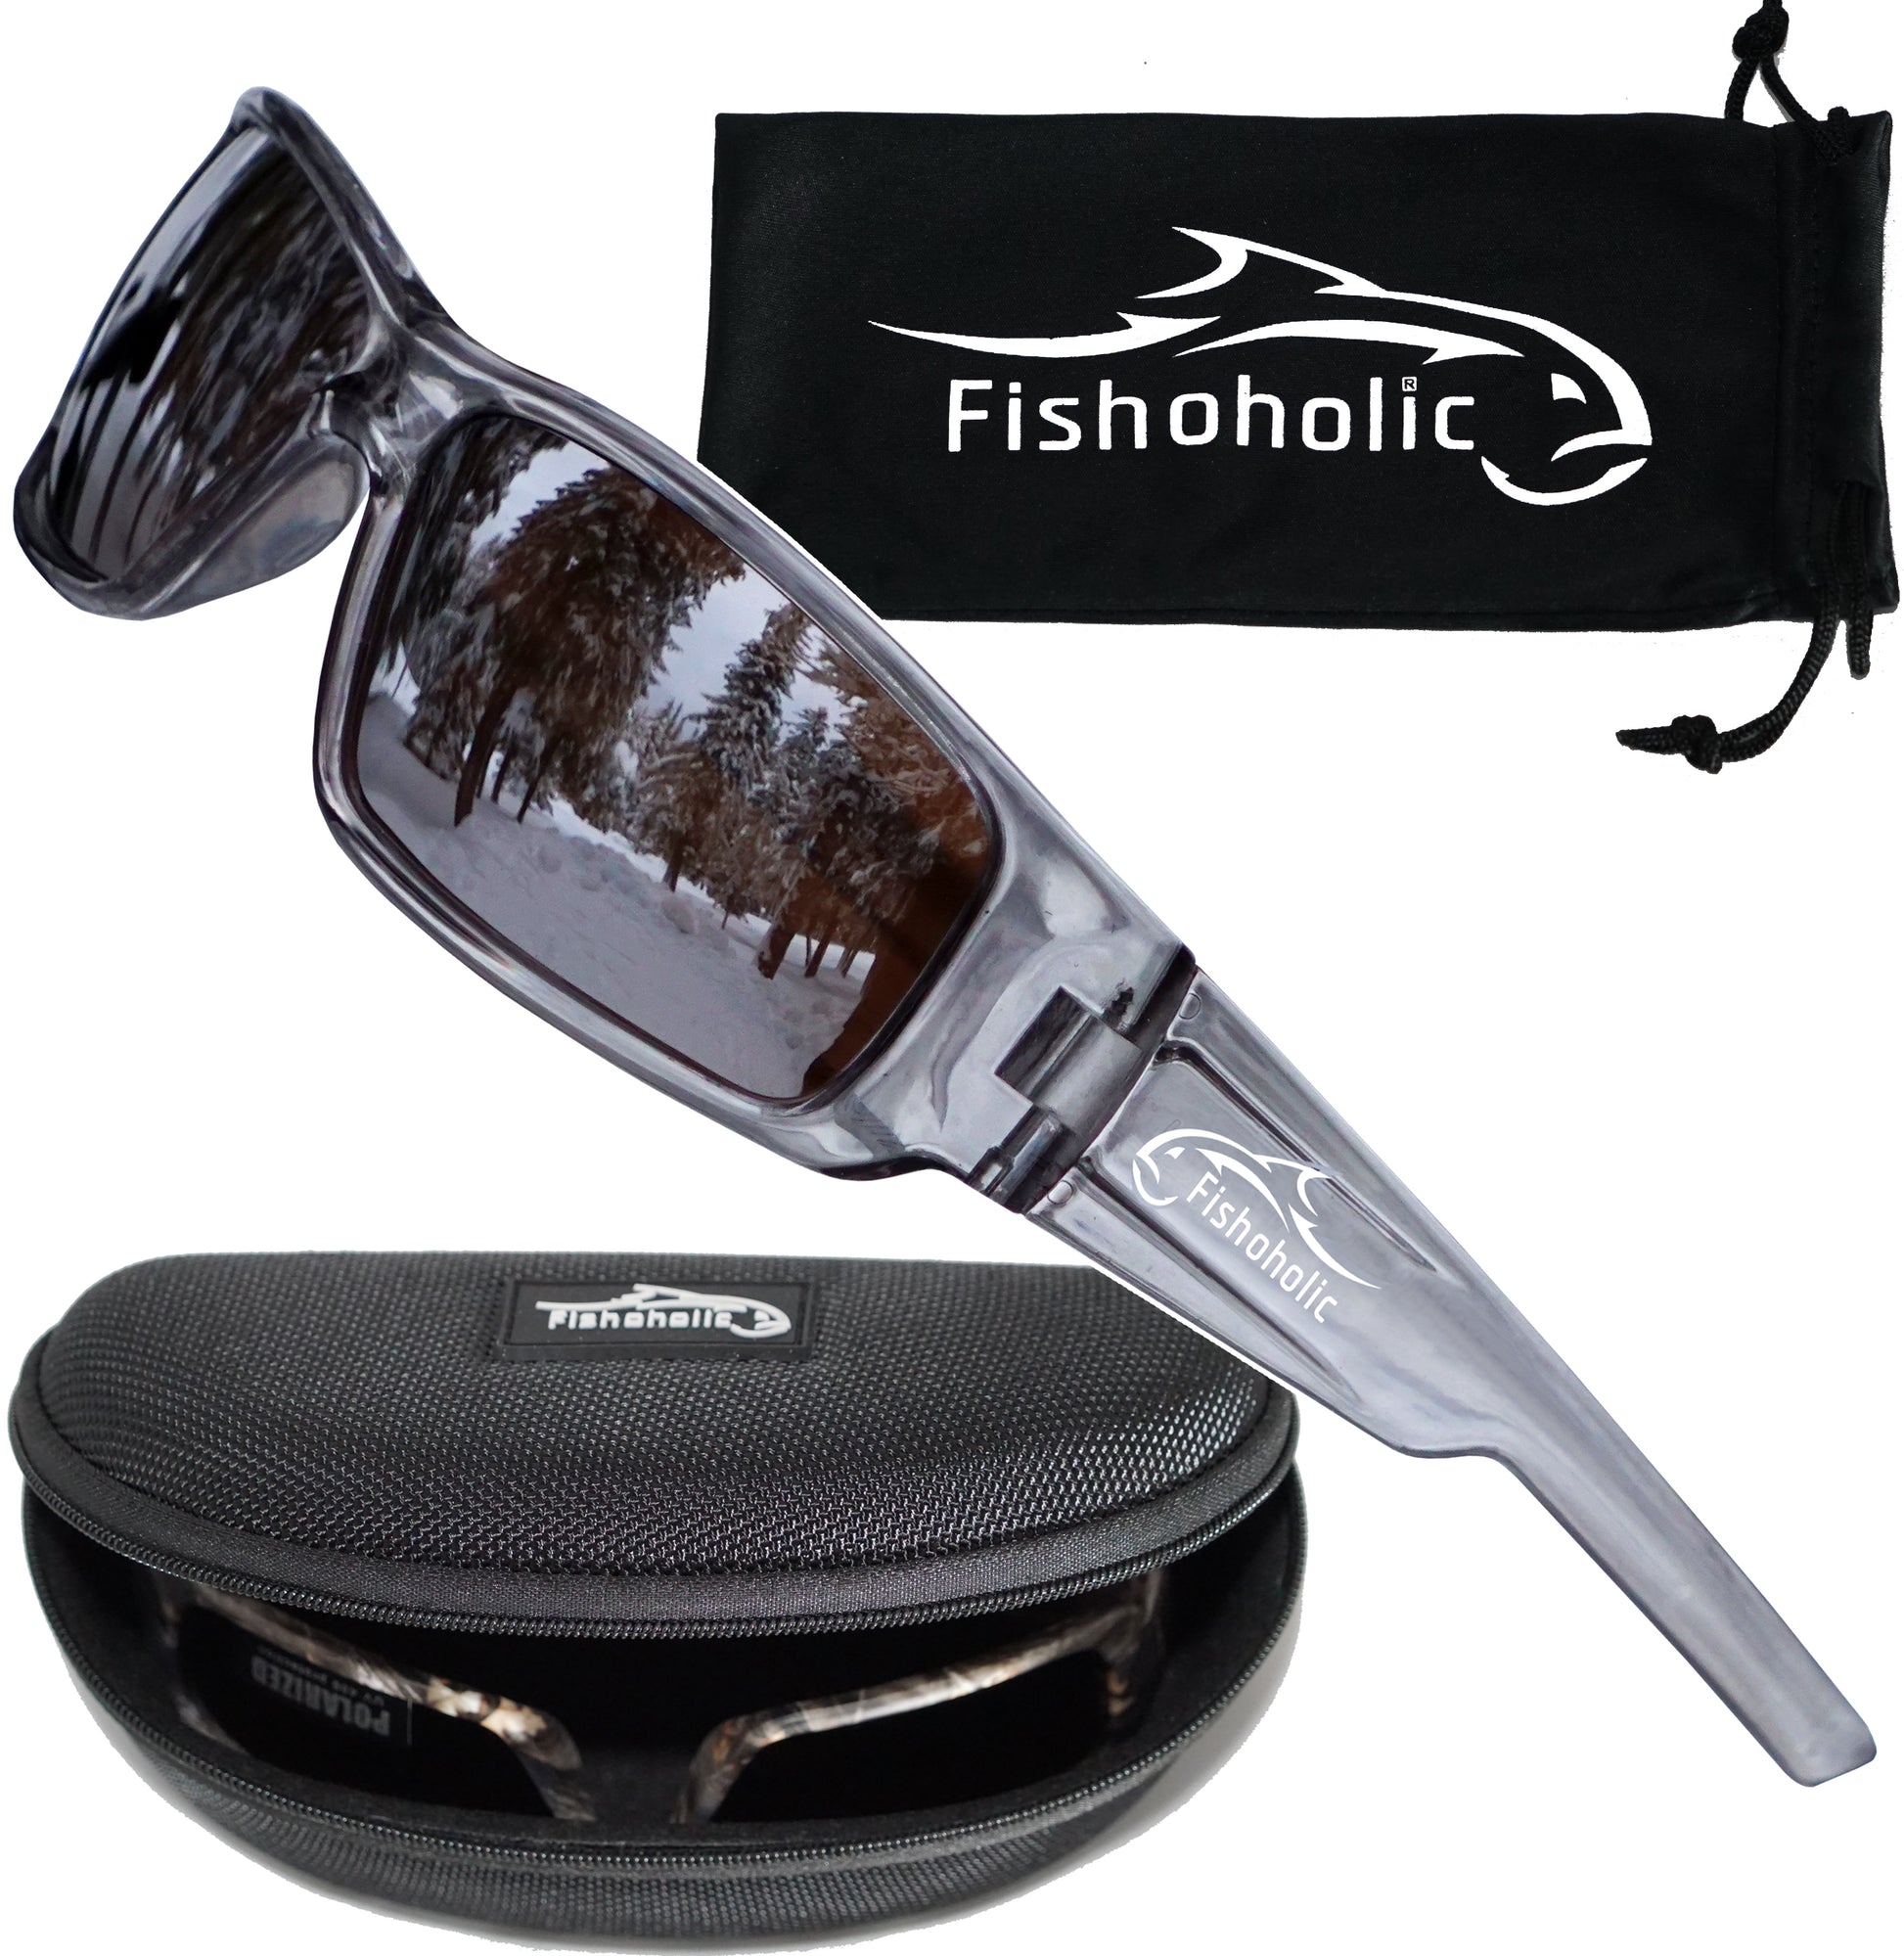 Fishoholic Pro Series Polarized Fishing Sunglasses - 5 Colors - L/XL -  Rubber Accents - UV400 Sun Protection - Great Gift